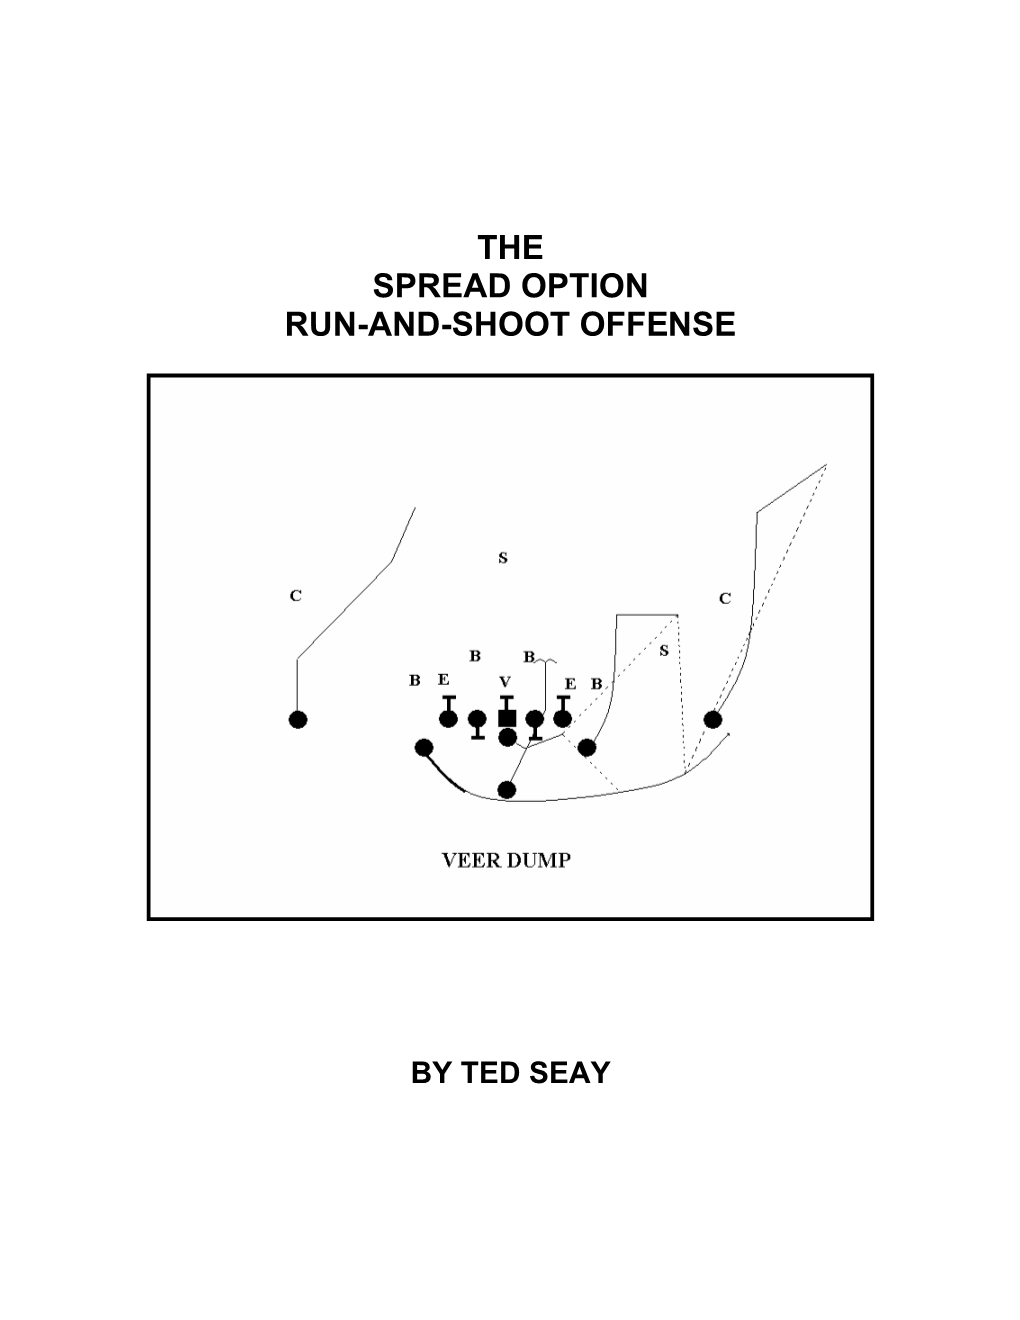 The Spread Option Run-And-Shoot Offense